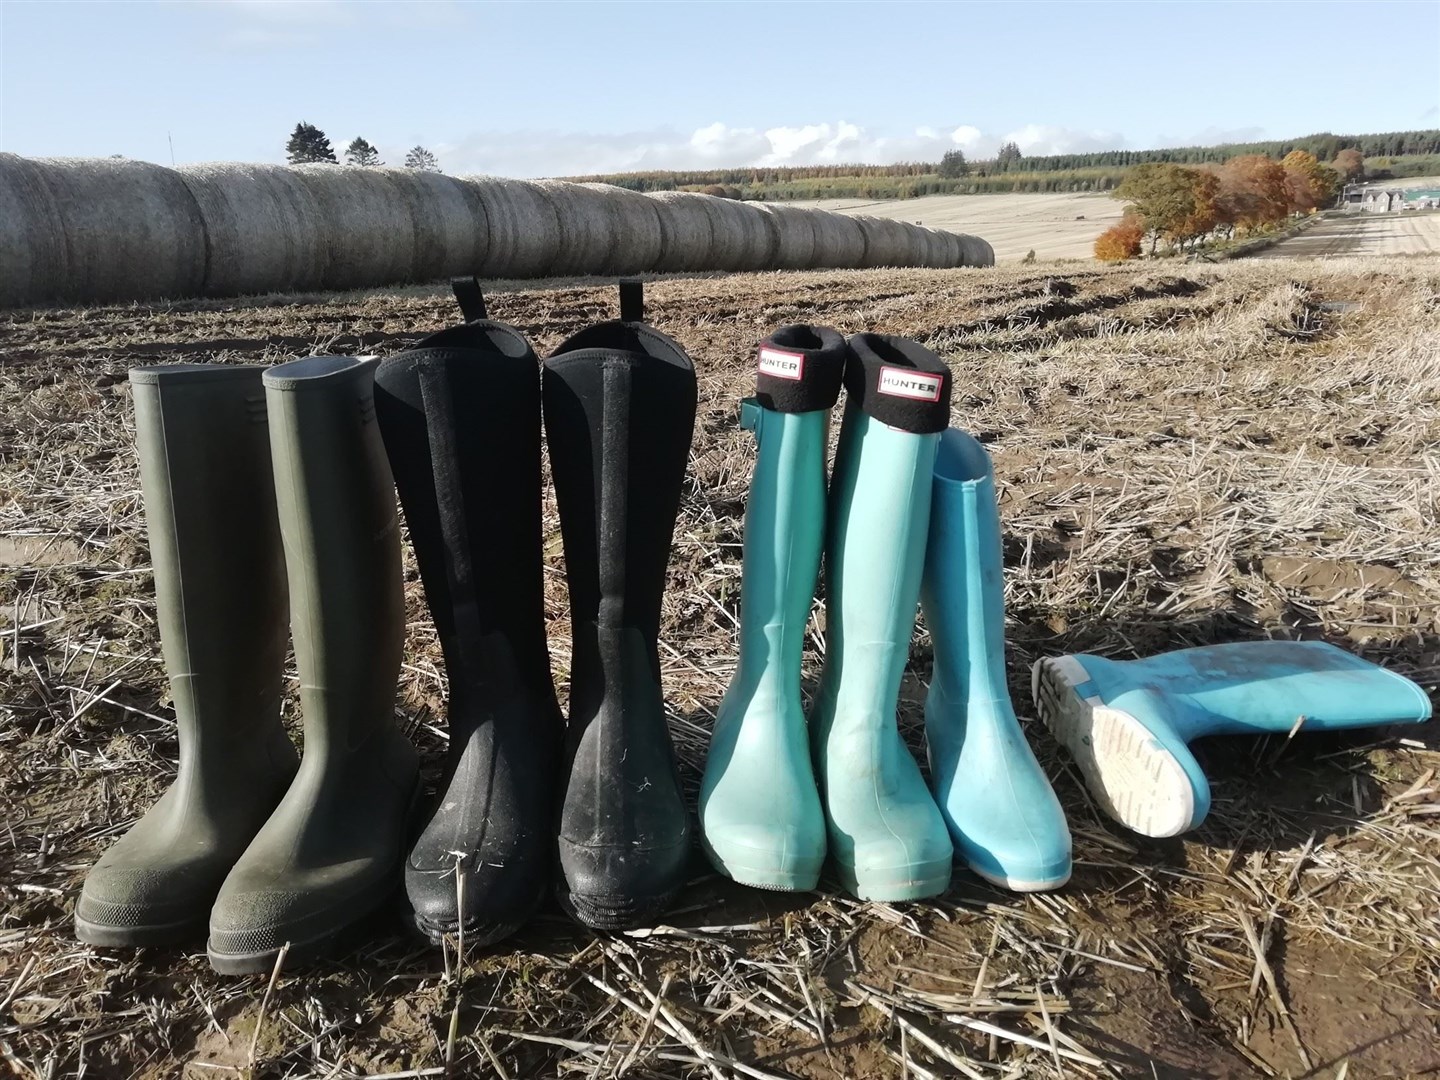 Joanna Lipp (13), from Killen, was named junior winner for this image of a row of wellies on a Black Isle farm.